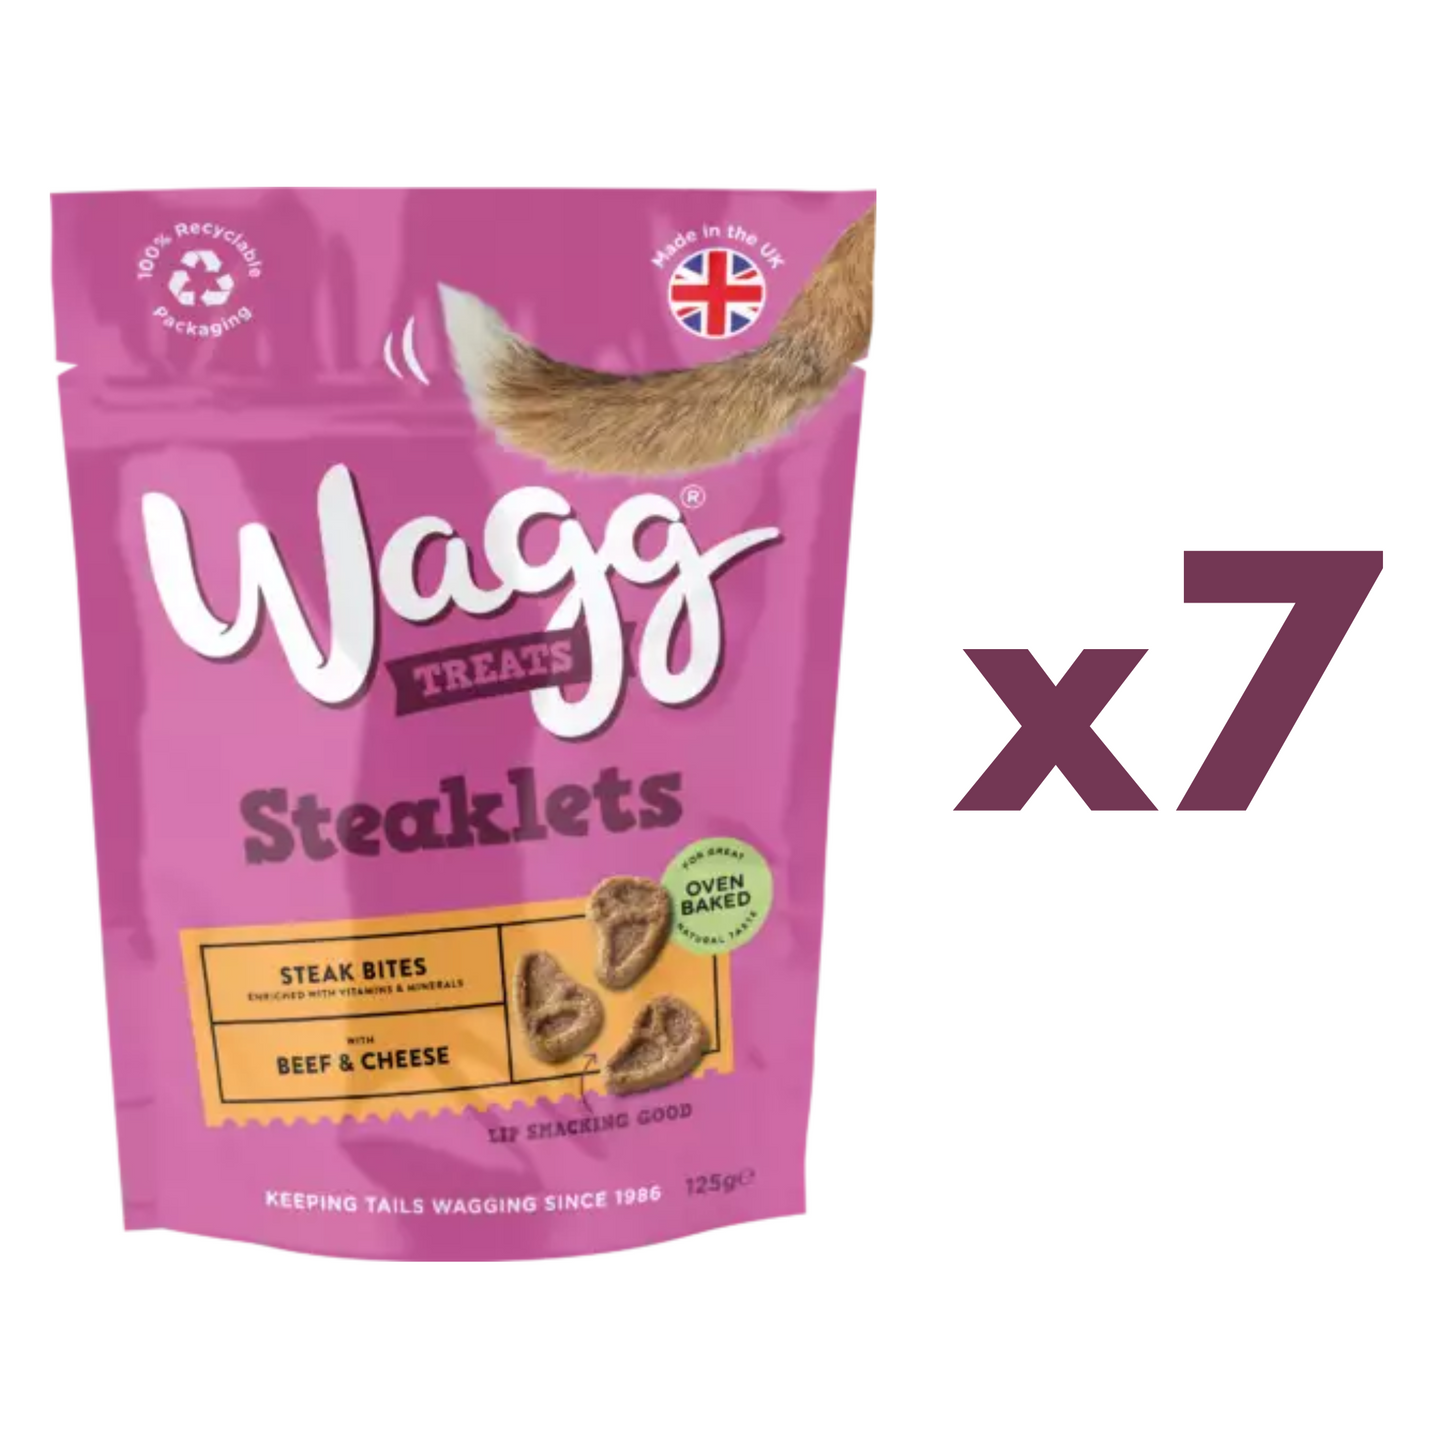 Wagg Steaklets Dog Treats With Beef & Cheese Steak Bites 125g